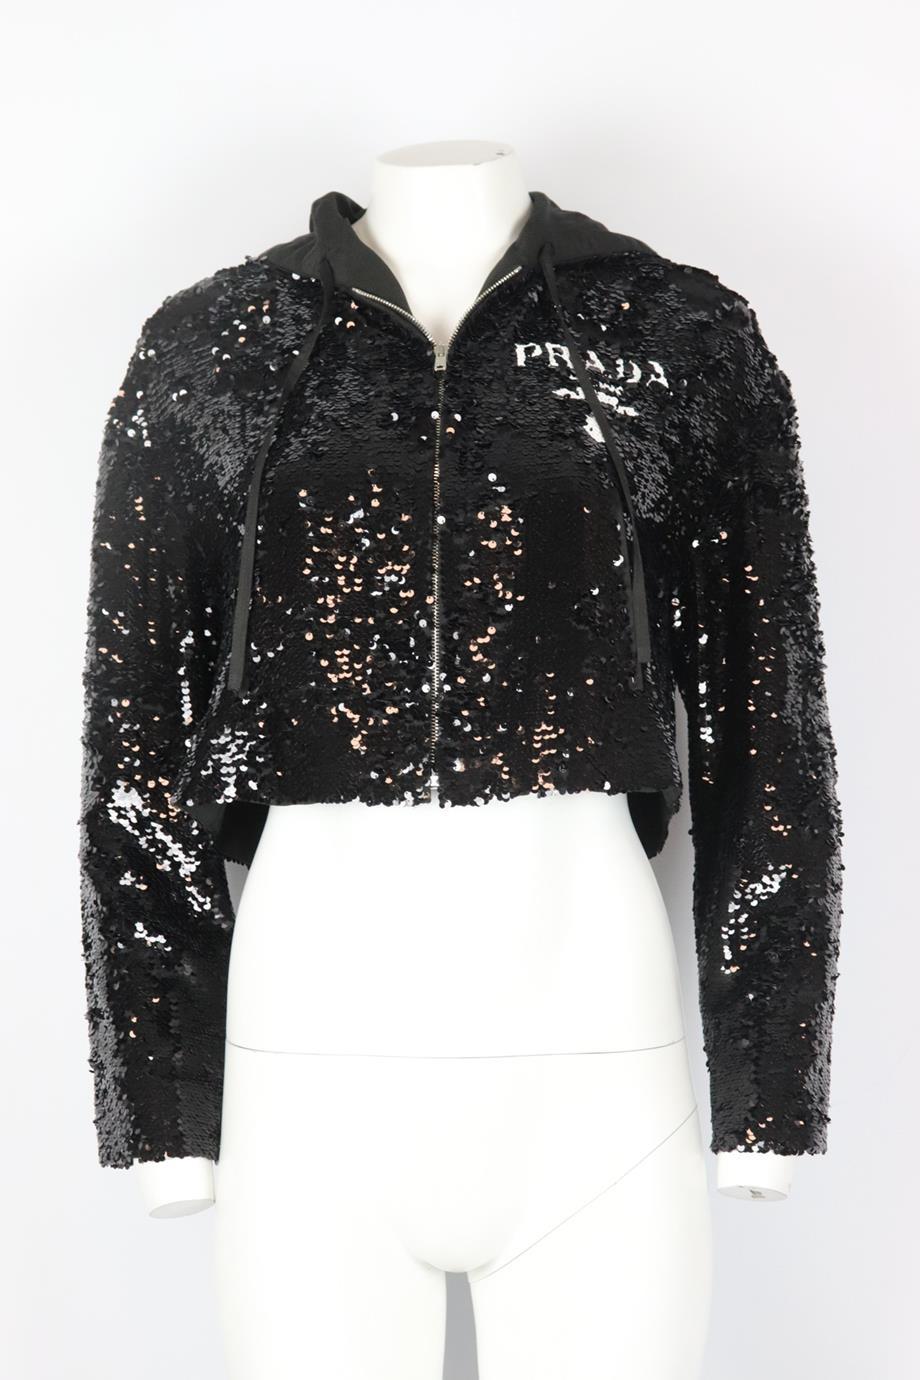 Prada cropped logo detailed sequined chiffon hoodie. Black and white. Long sleeve, crewneck. Zip fastening at front. 100% Silk; lining: 66% viscose, 34% silk. Size: IT 36 (UK 4, US 0, FR 32). Bust: 36 in. Waist: 39 in. Length: 17 in. Very good